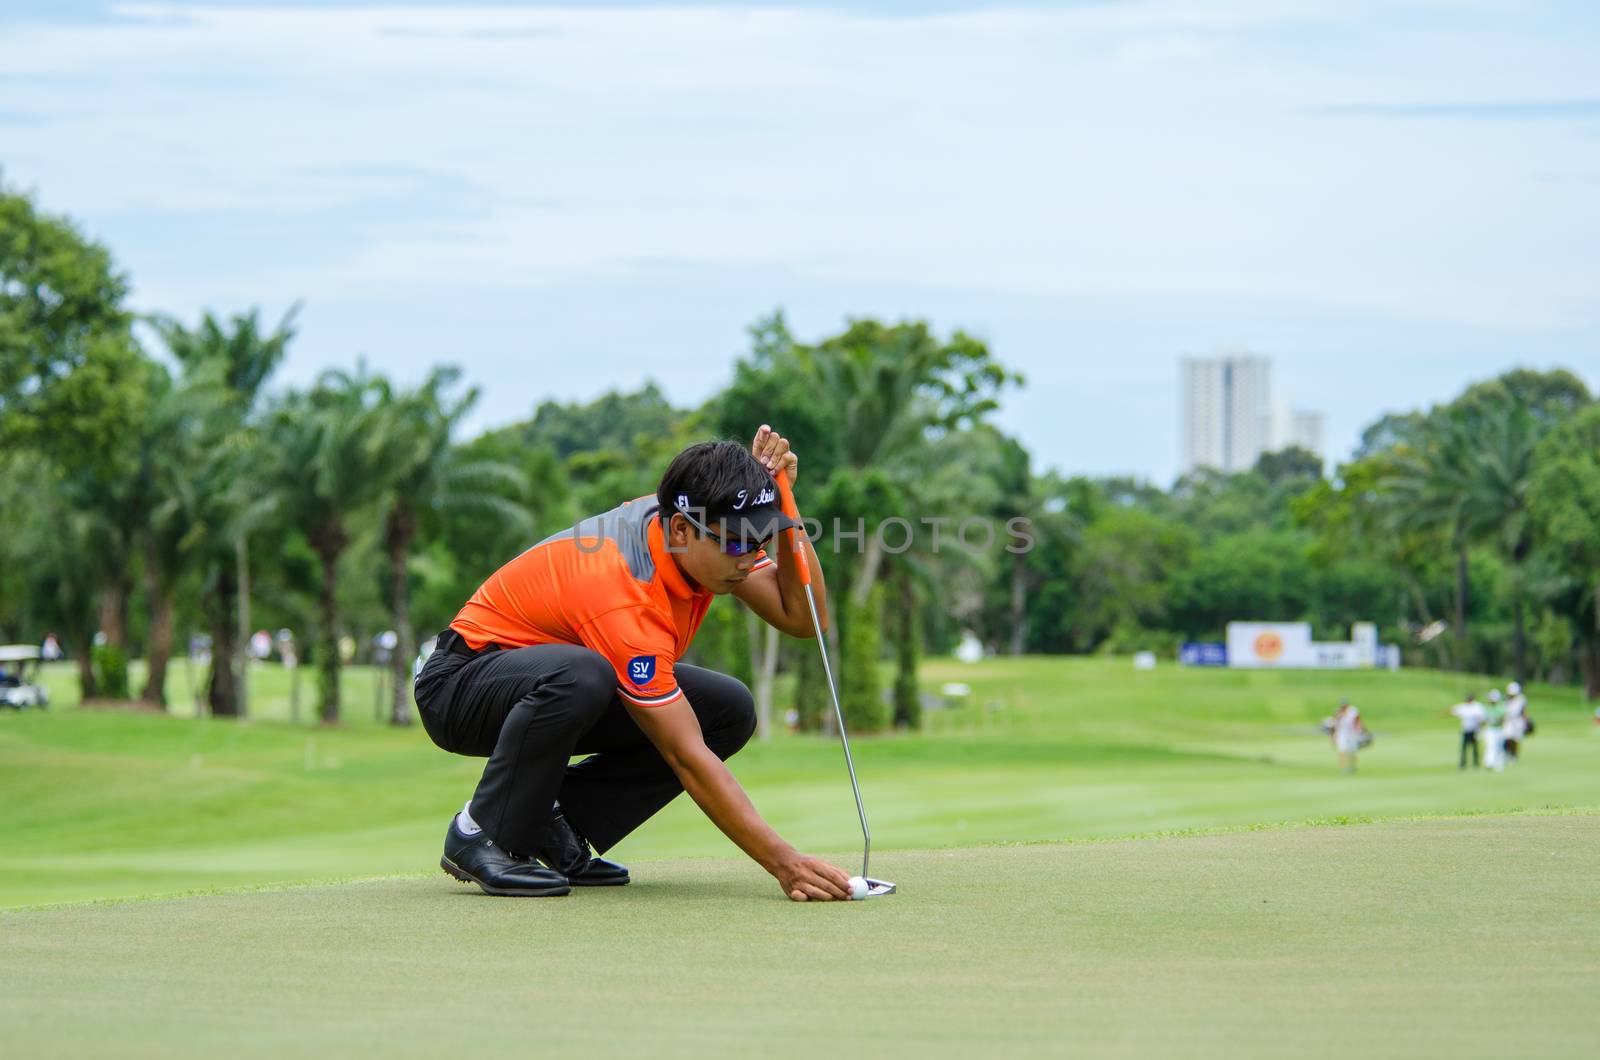 CHONBURI - JULY 31 : Natipong Srithong of Thailand in King's Cup 2016 at Phoenix Gold Golf & Country Club Pattaya on July 31, 2016 in Chonburi, Thailand.